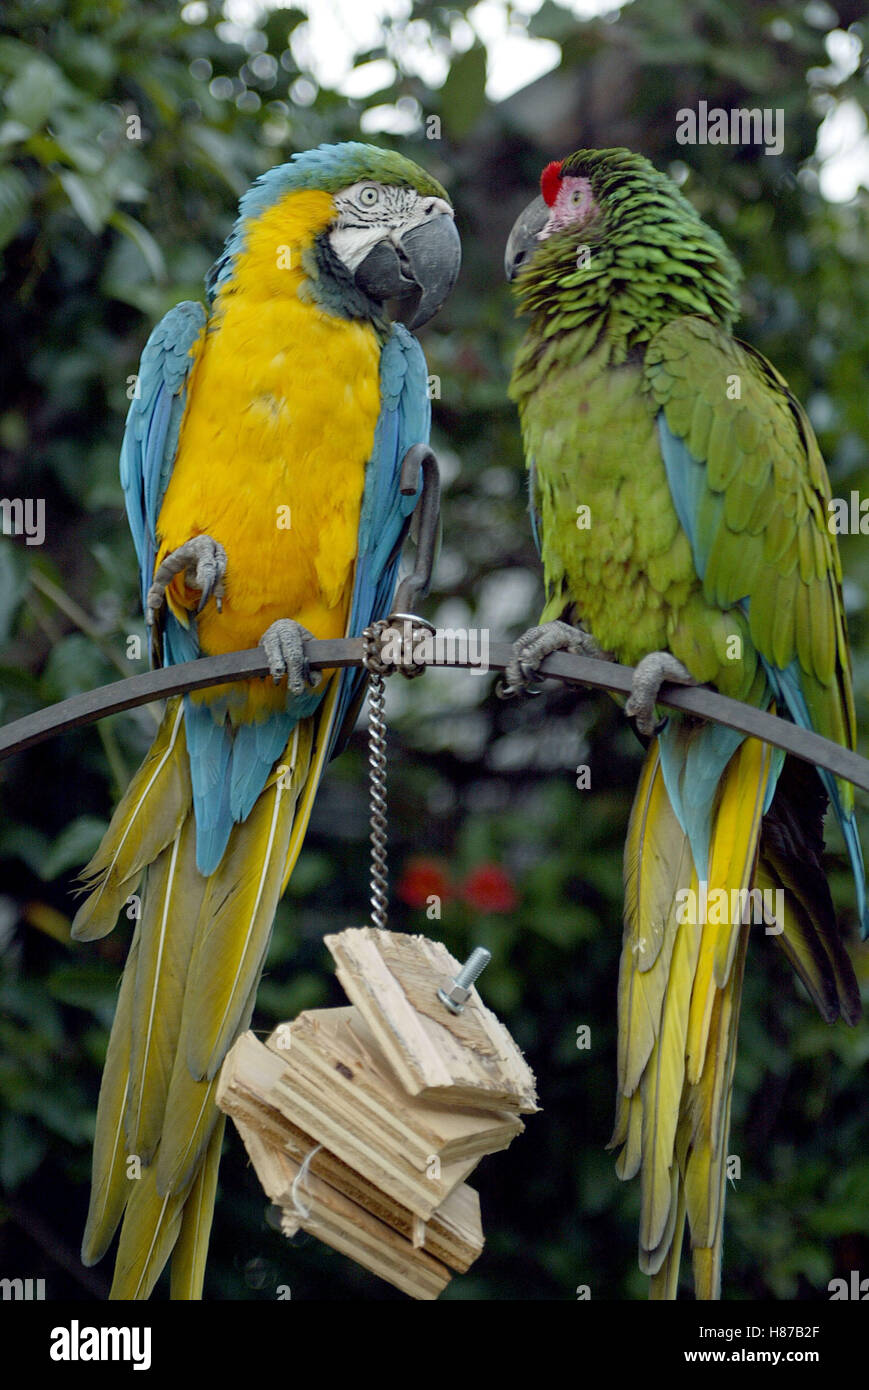 PARROTS PLAYBOY MANSION CATCHES FASHIO PLAYBOY MANSION LOS ANGELES USA 15 May 2003 Stock Photo